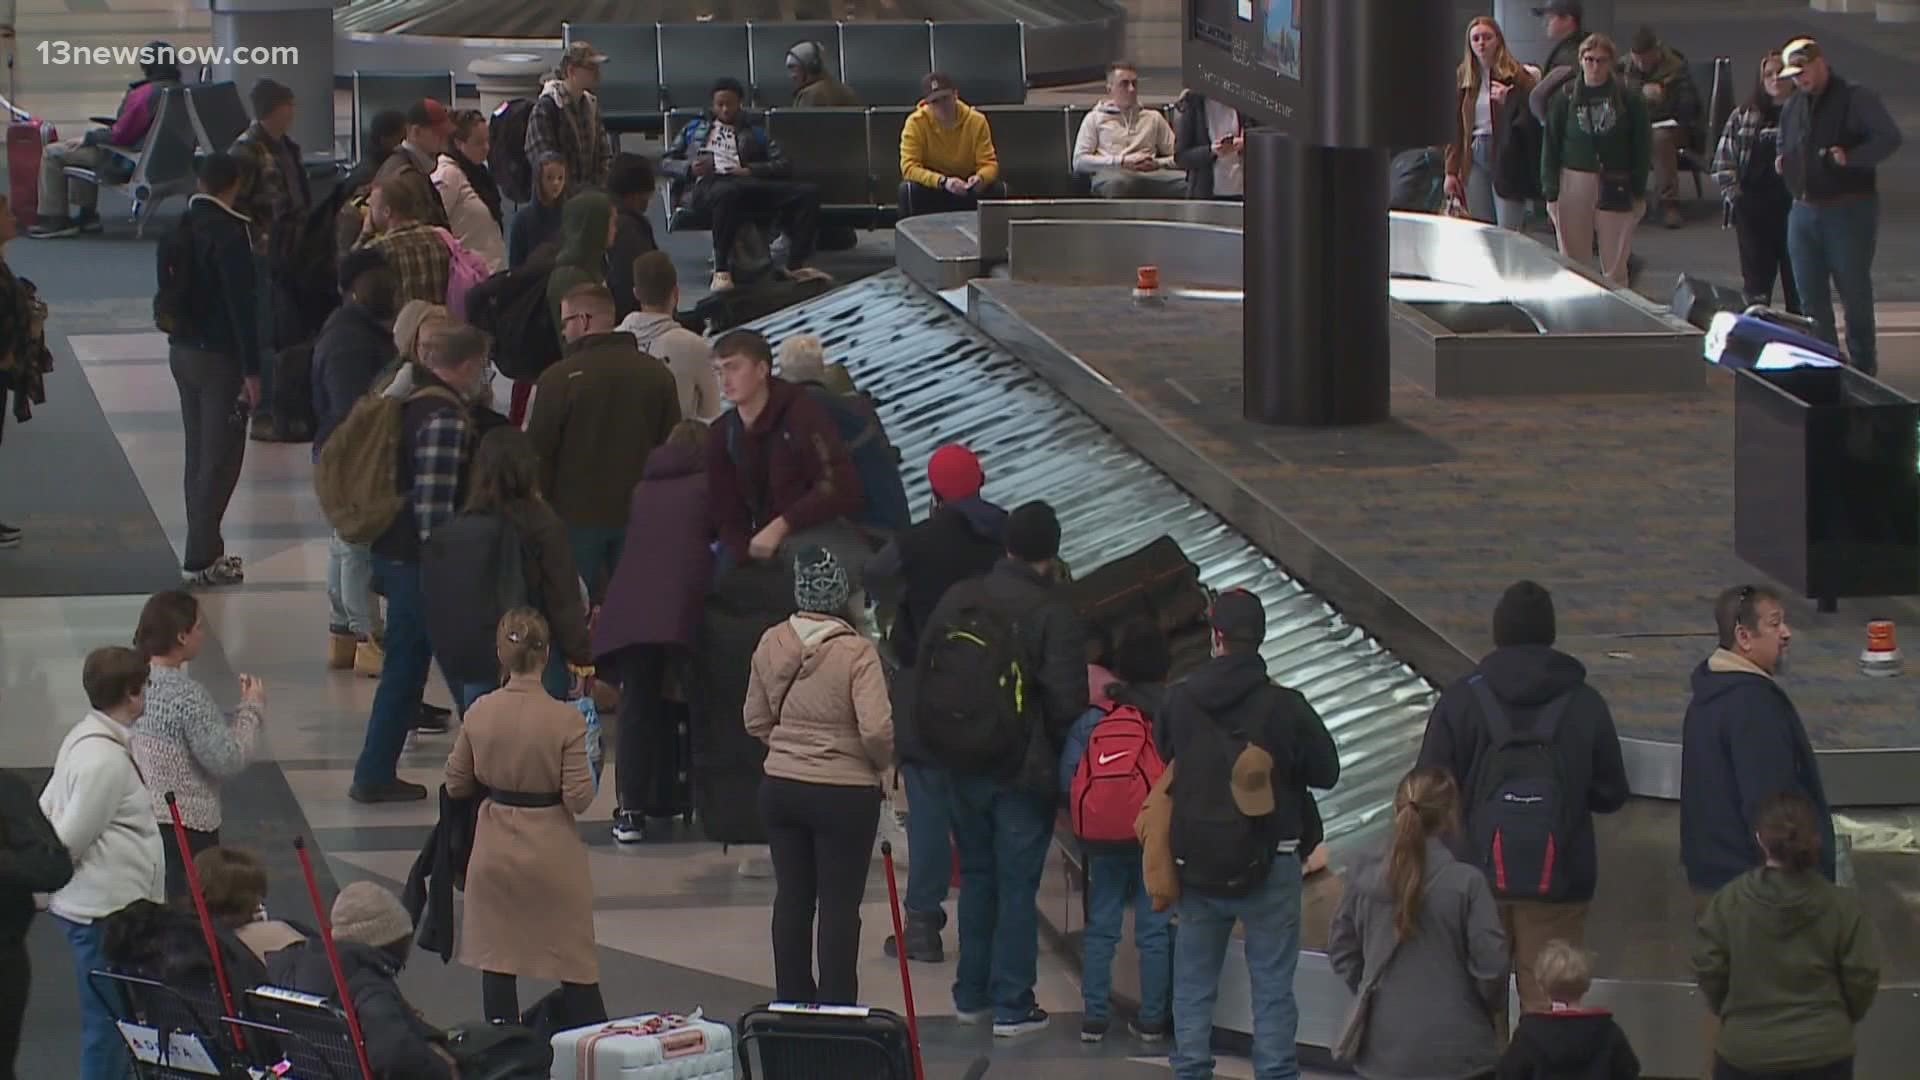 The holiday travel rush has turned into a holiday travel nightmare for some. People across the country are still struggling to get home tonight.